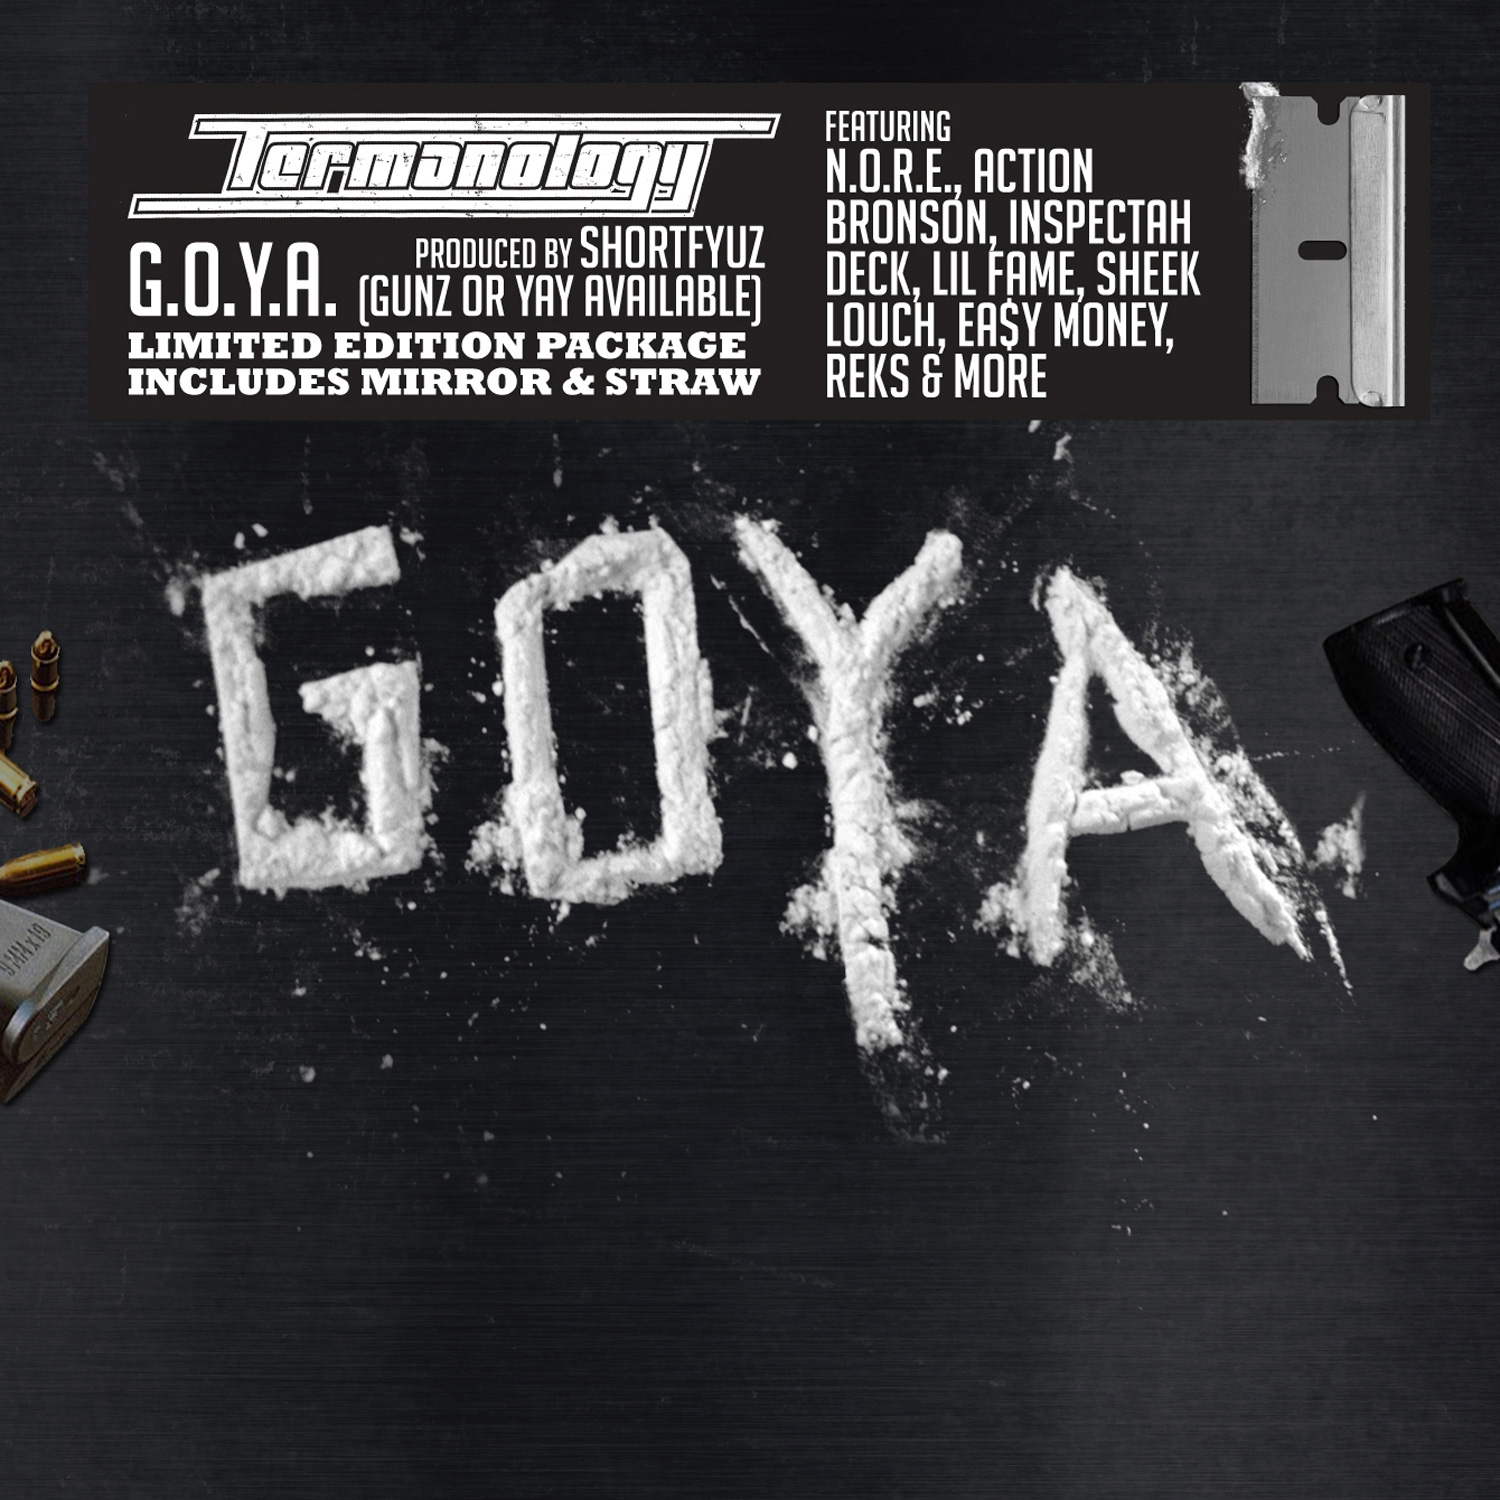 G.o.y.a.__gunz_or_yay_available_